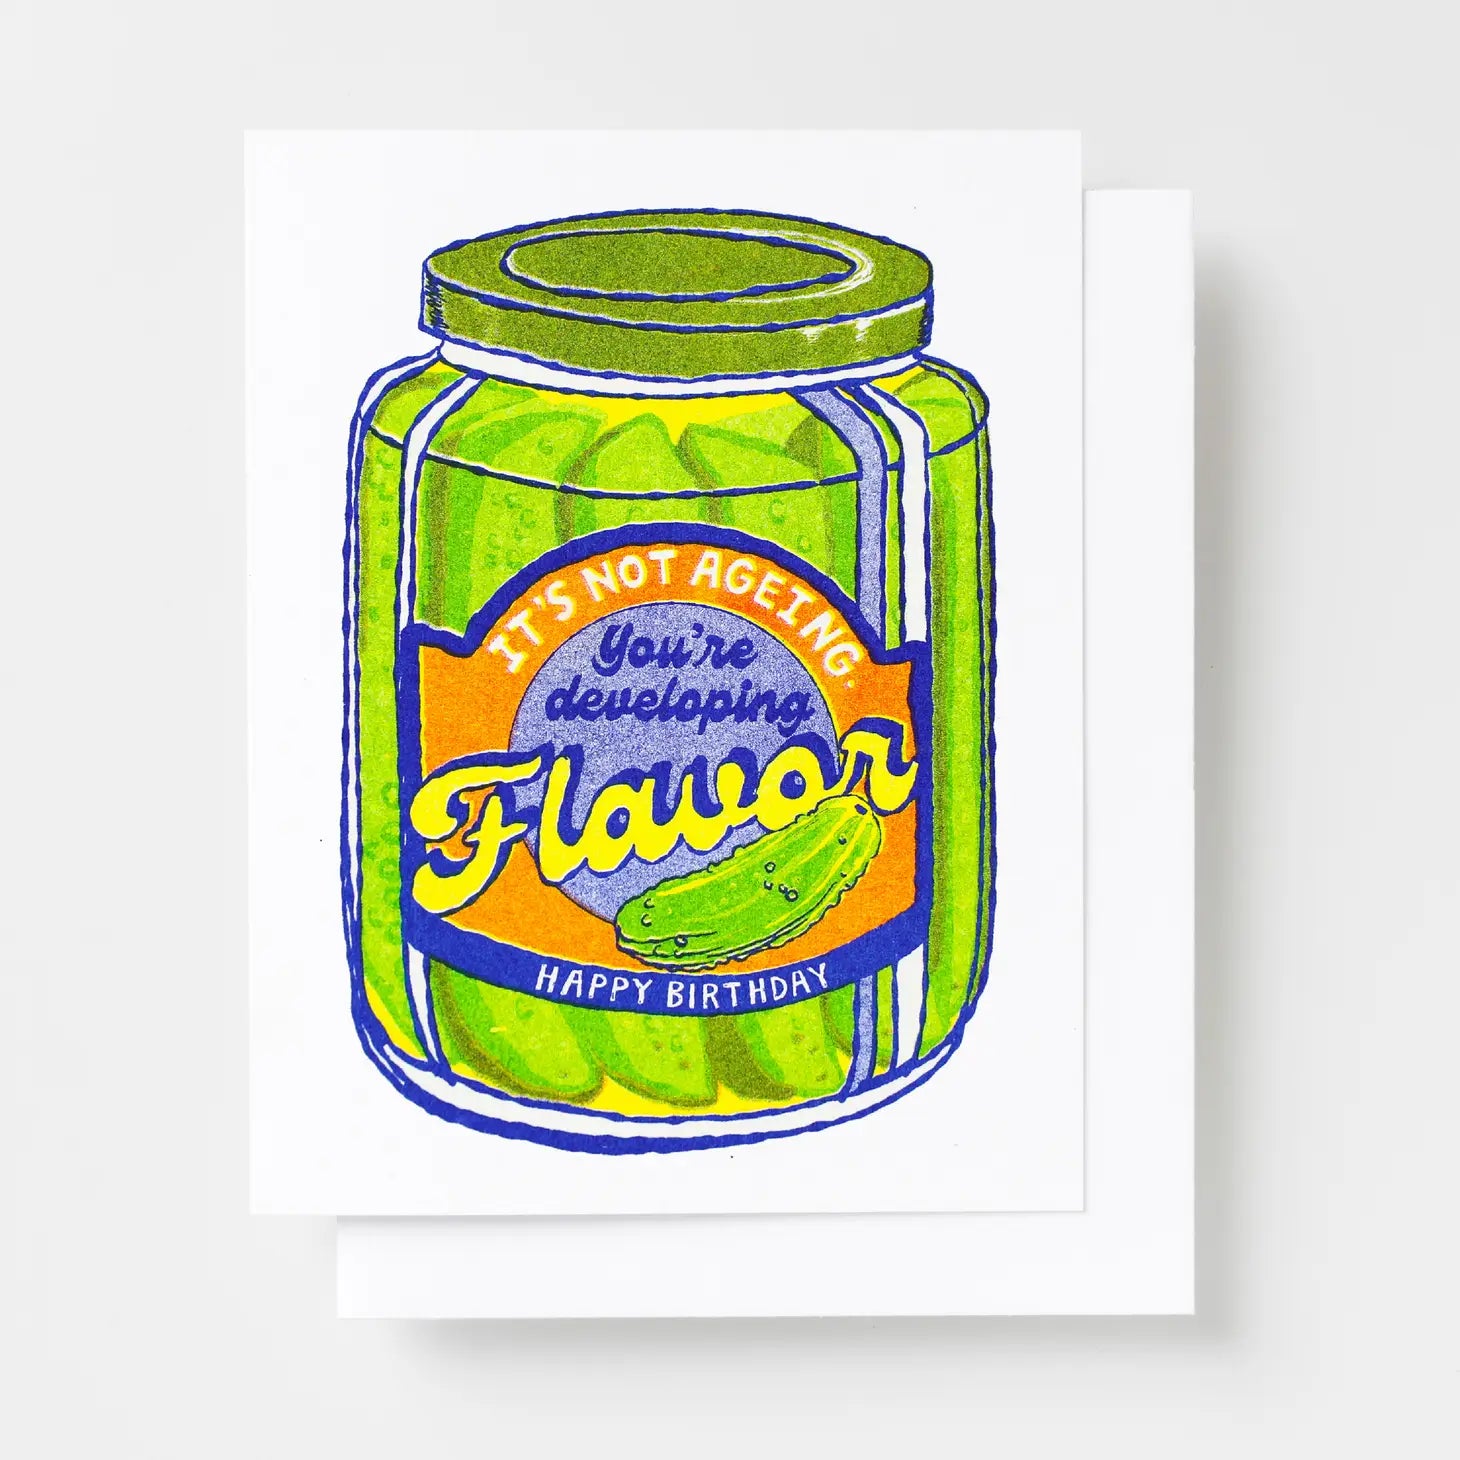 Developing Flavor - Greeting Card